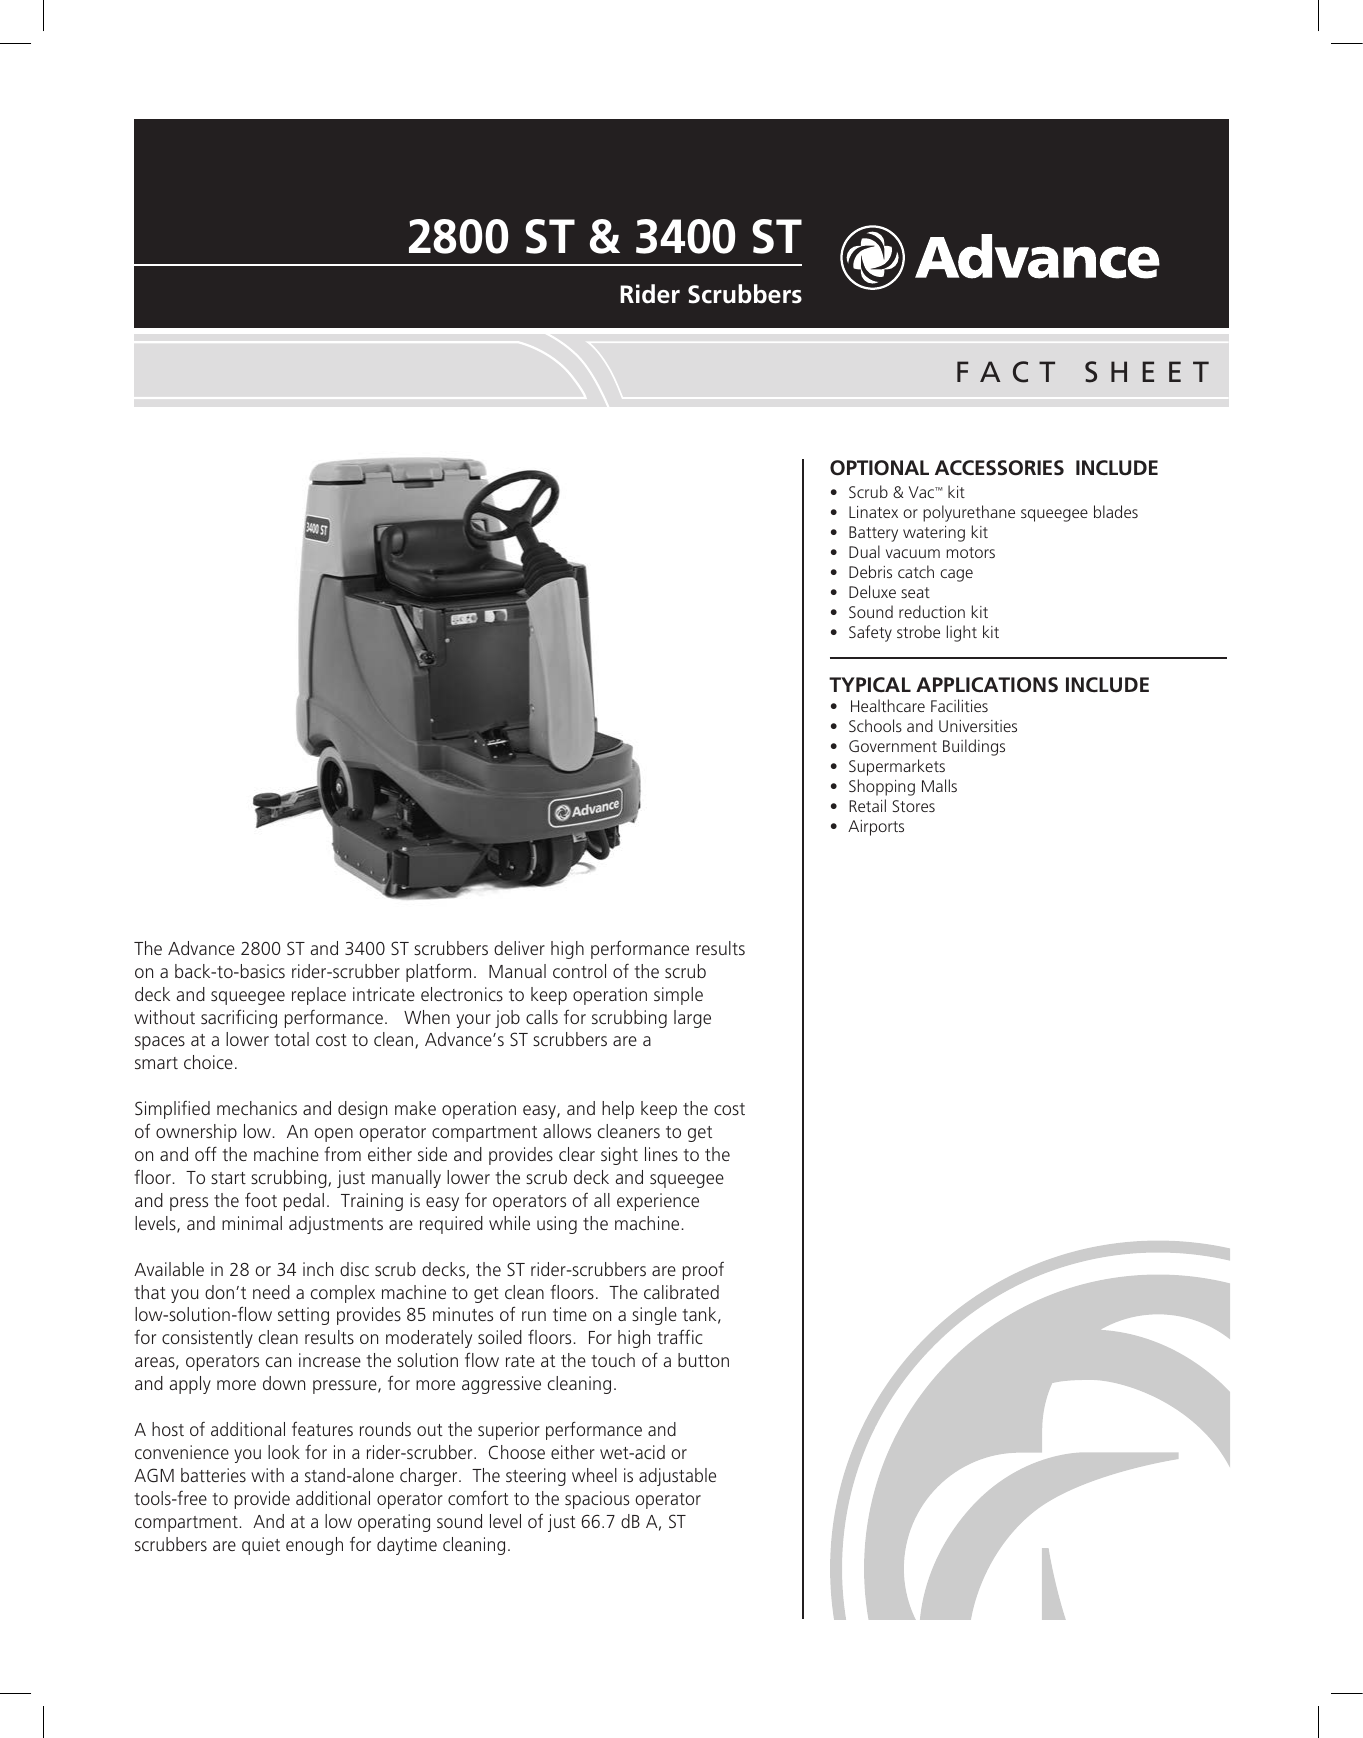 Page 1 of 2 - SC2800 ST Rider Scrubber Specifications